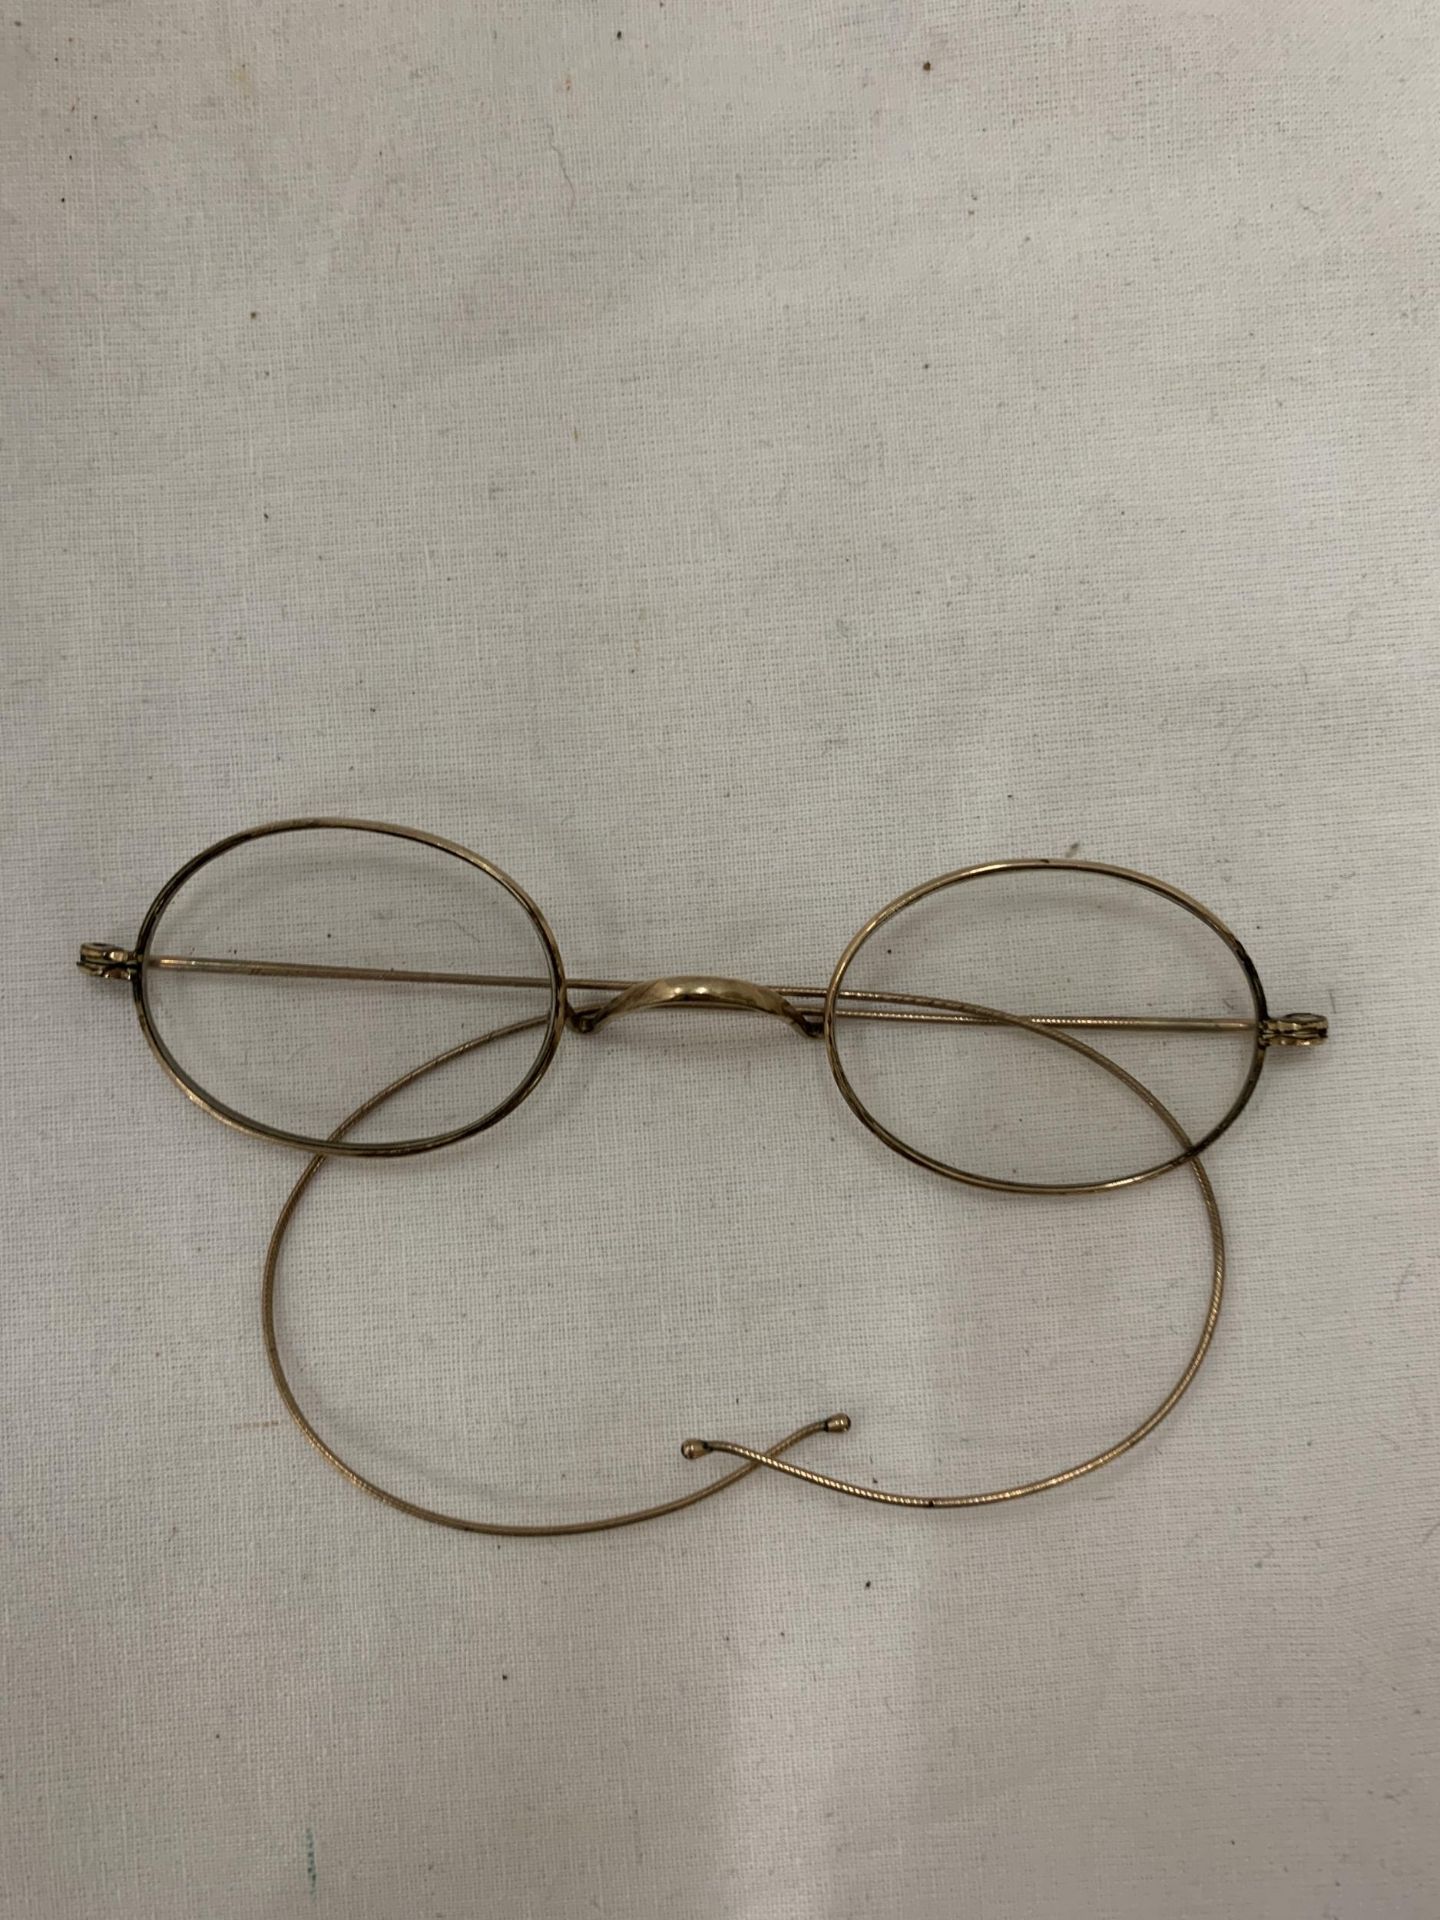 A PAIR OF VICTORIAN SPECTACLES, CASED - Image 2 of 4